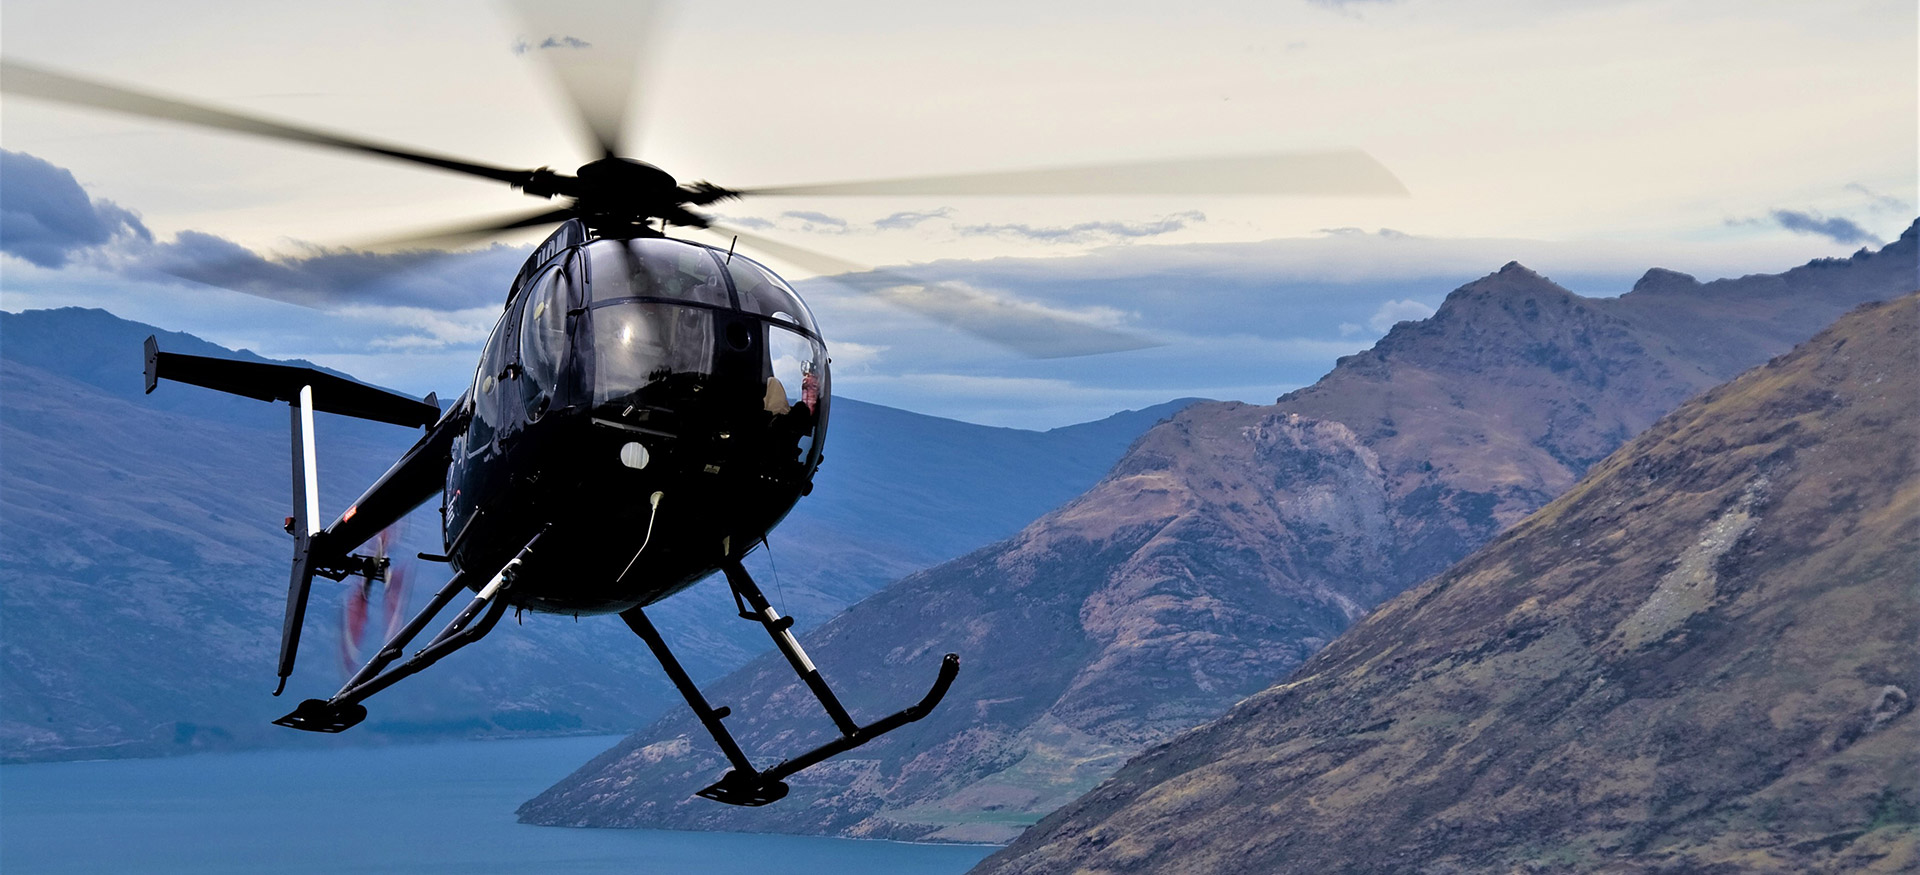 Md 500 Helicopter Nz - HD Wallpaper 